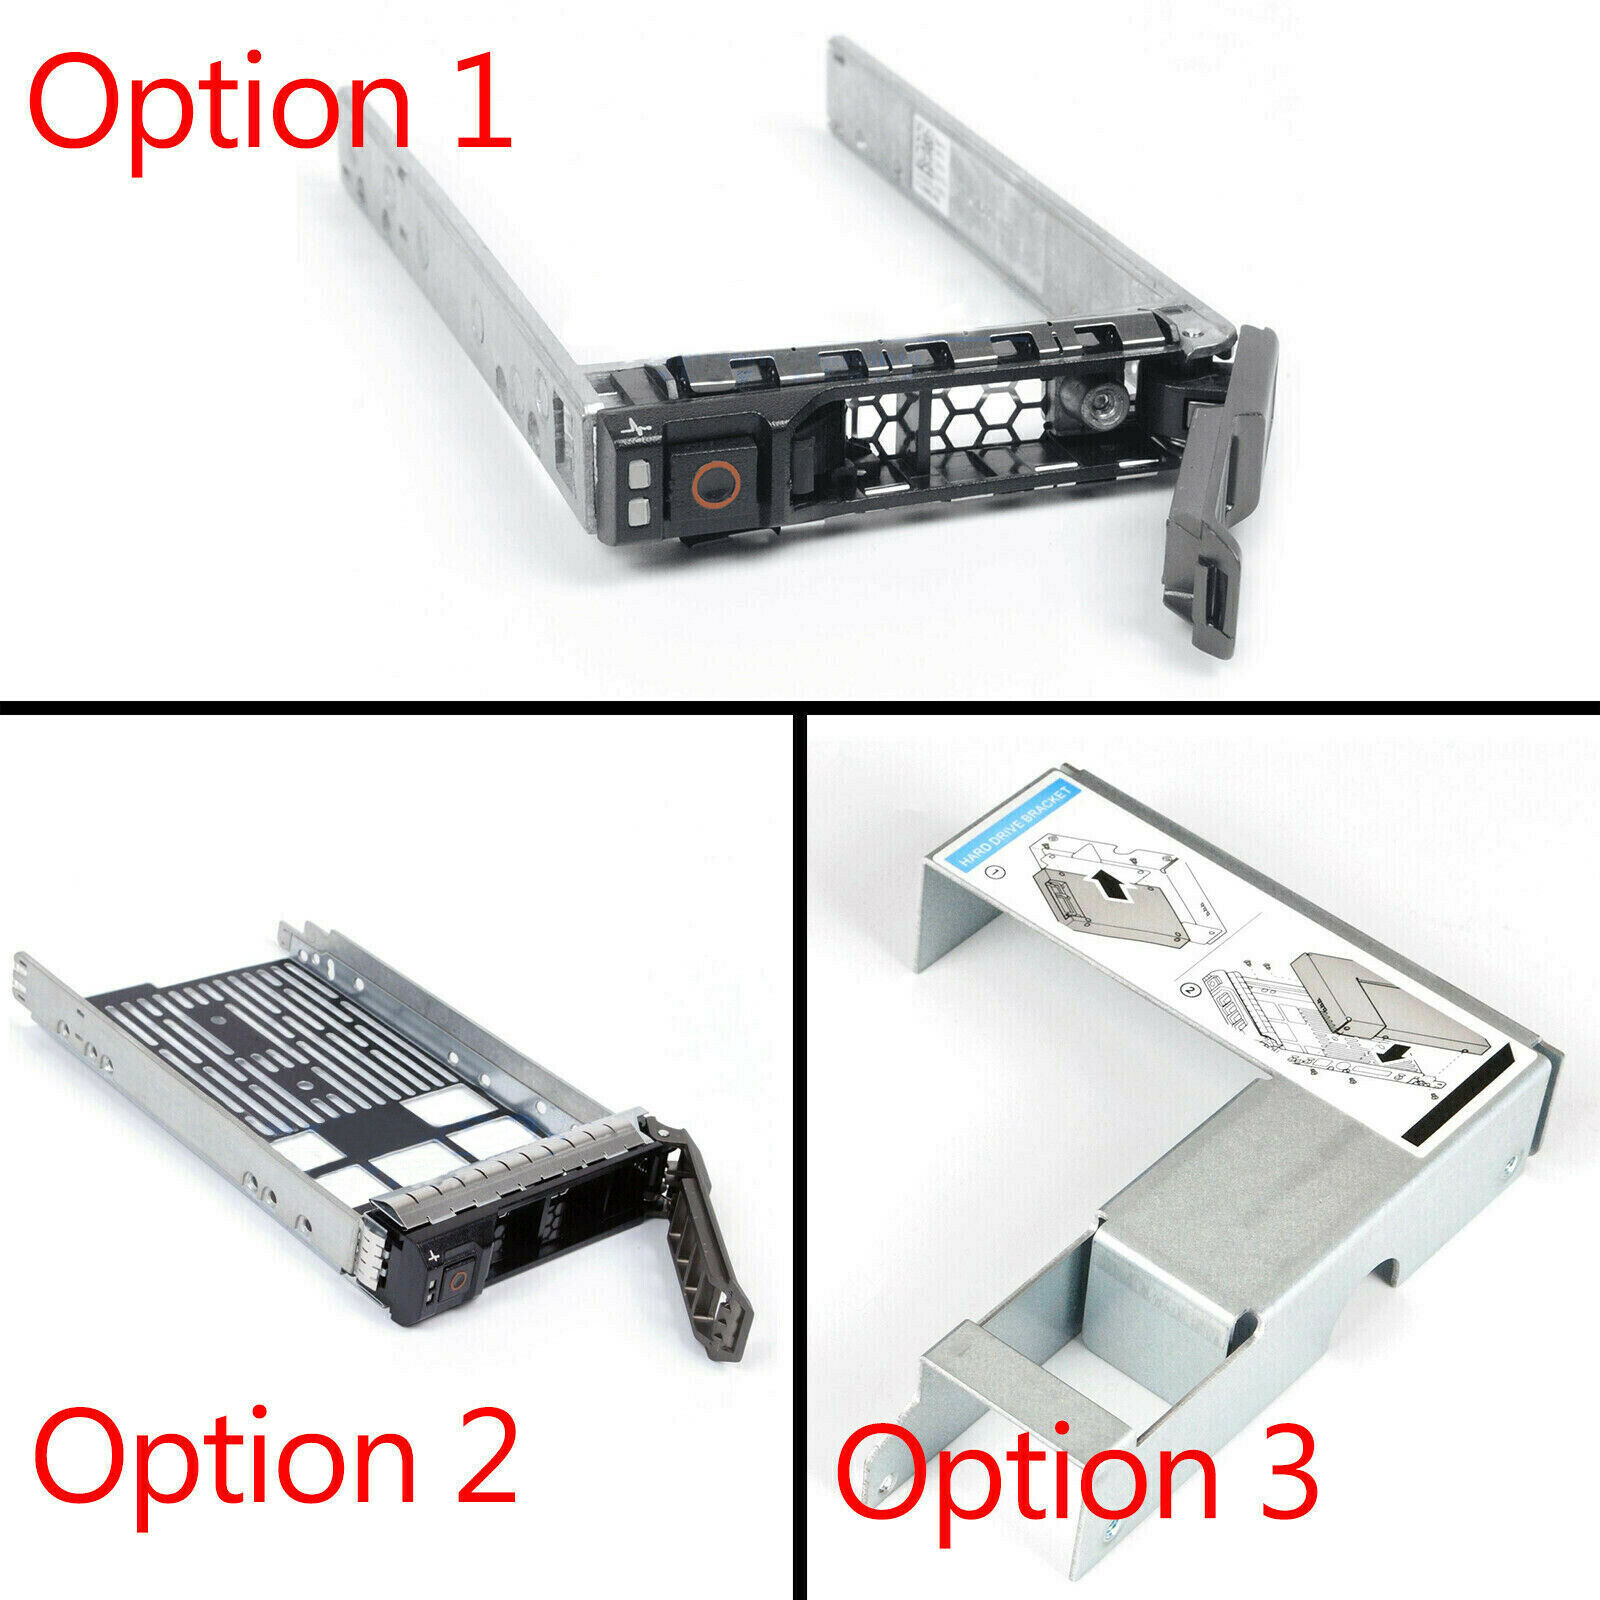 2.5" 3.5" Sas Hdd Tray Caddy Adapte For Dell Poweredge R720 R710 R620